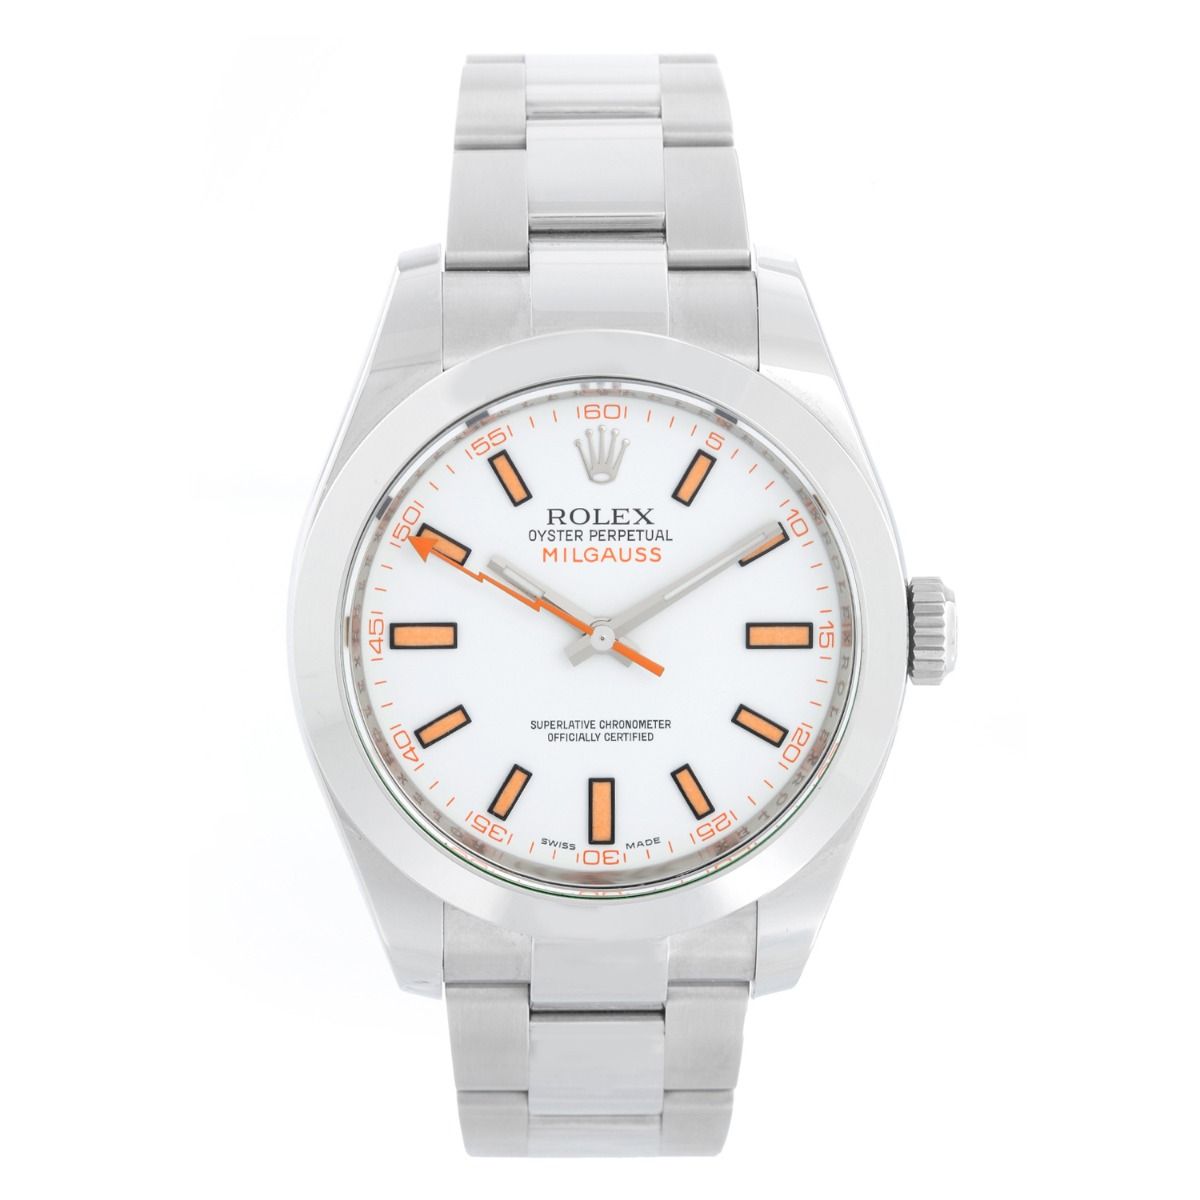 Rolex Stainless Steel White Dial 116400